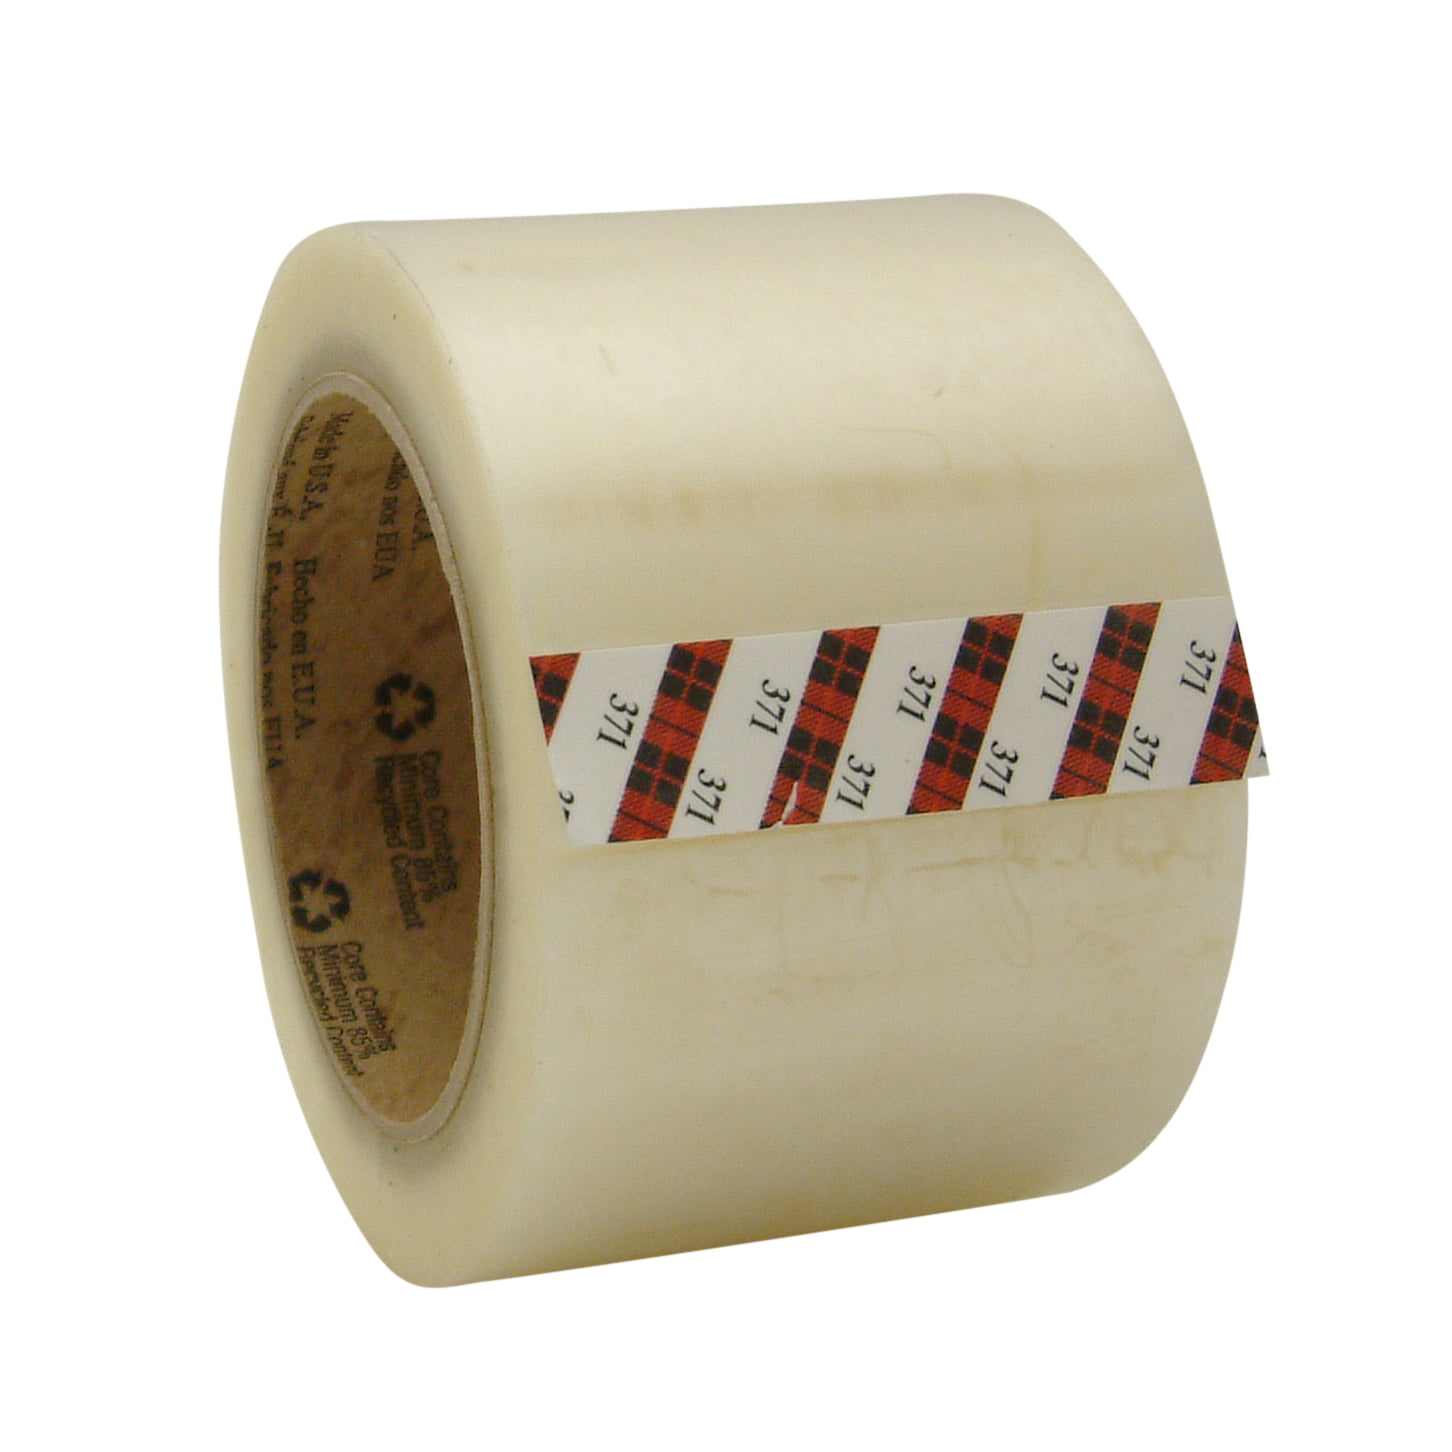 3M™ 371 Transparent Packaging Wrapping Tape 25mm X 66 Metres long 6 OR 12 ROLLS 